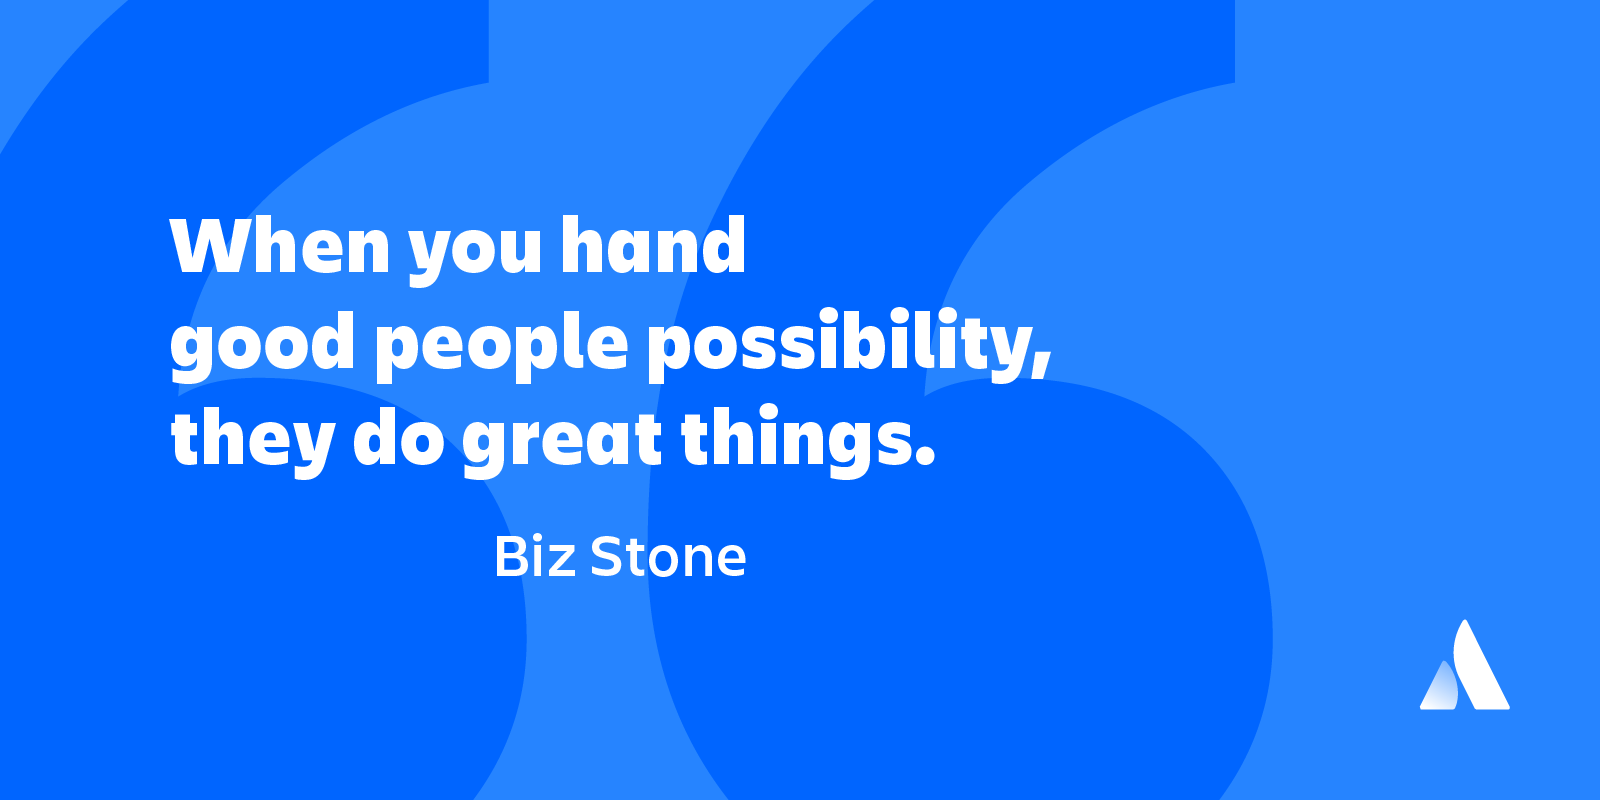 32 non-corny teamwork quotes you'll actually like - Work Life by Atlassian